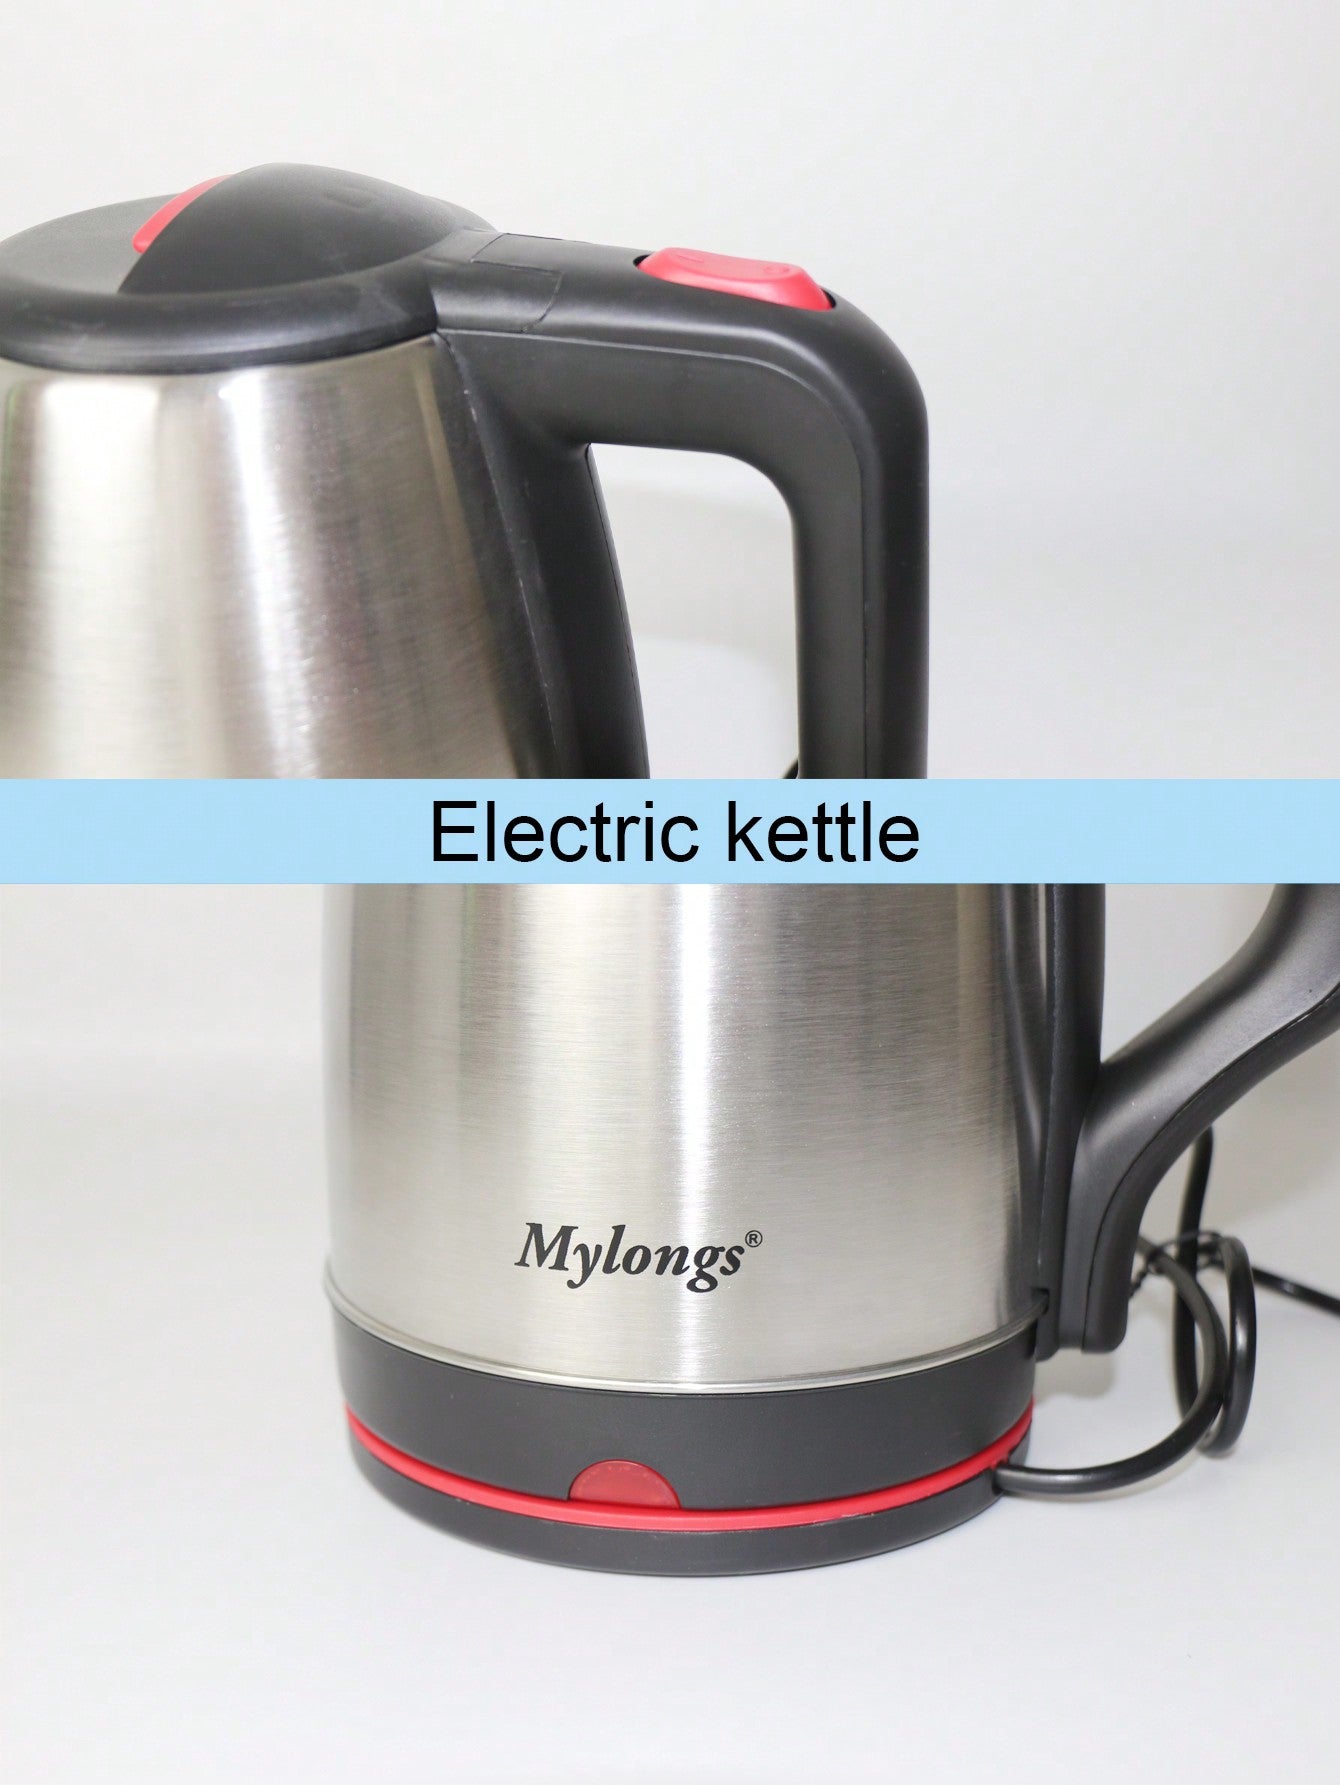 1 Electric Kettle, Fully Automatic Constant Temperature Stainless Steel Kettle 2.0l, 2000 Watts With Led Display, Overheating Protection, Automatic Power Off, 220-240v Large Capacity Health Kettle-Silver-2